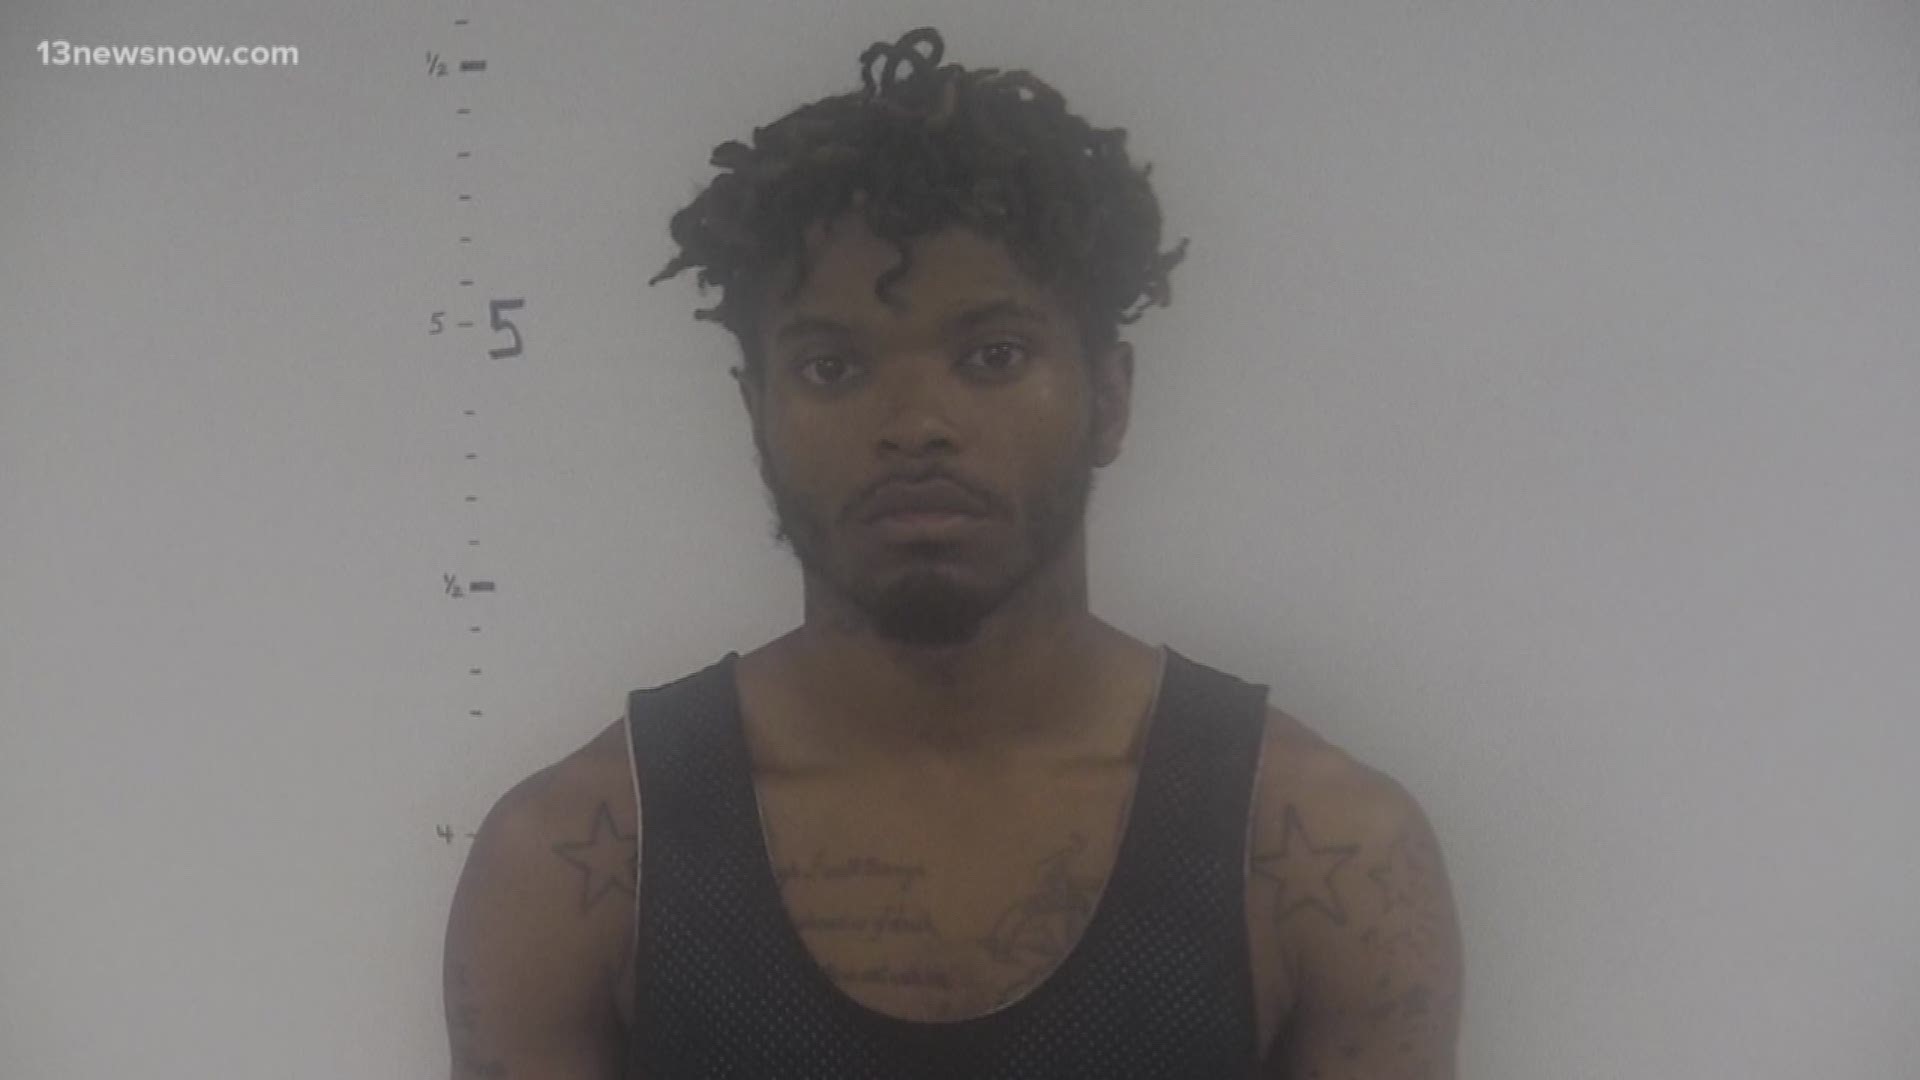 Maurice Lee was found guilty of assault with intent to commit murder and discharging a firearm after he shot his boyfriend in the Great Dismal Swamp in May 2019.